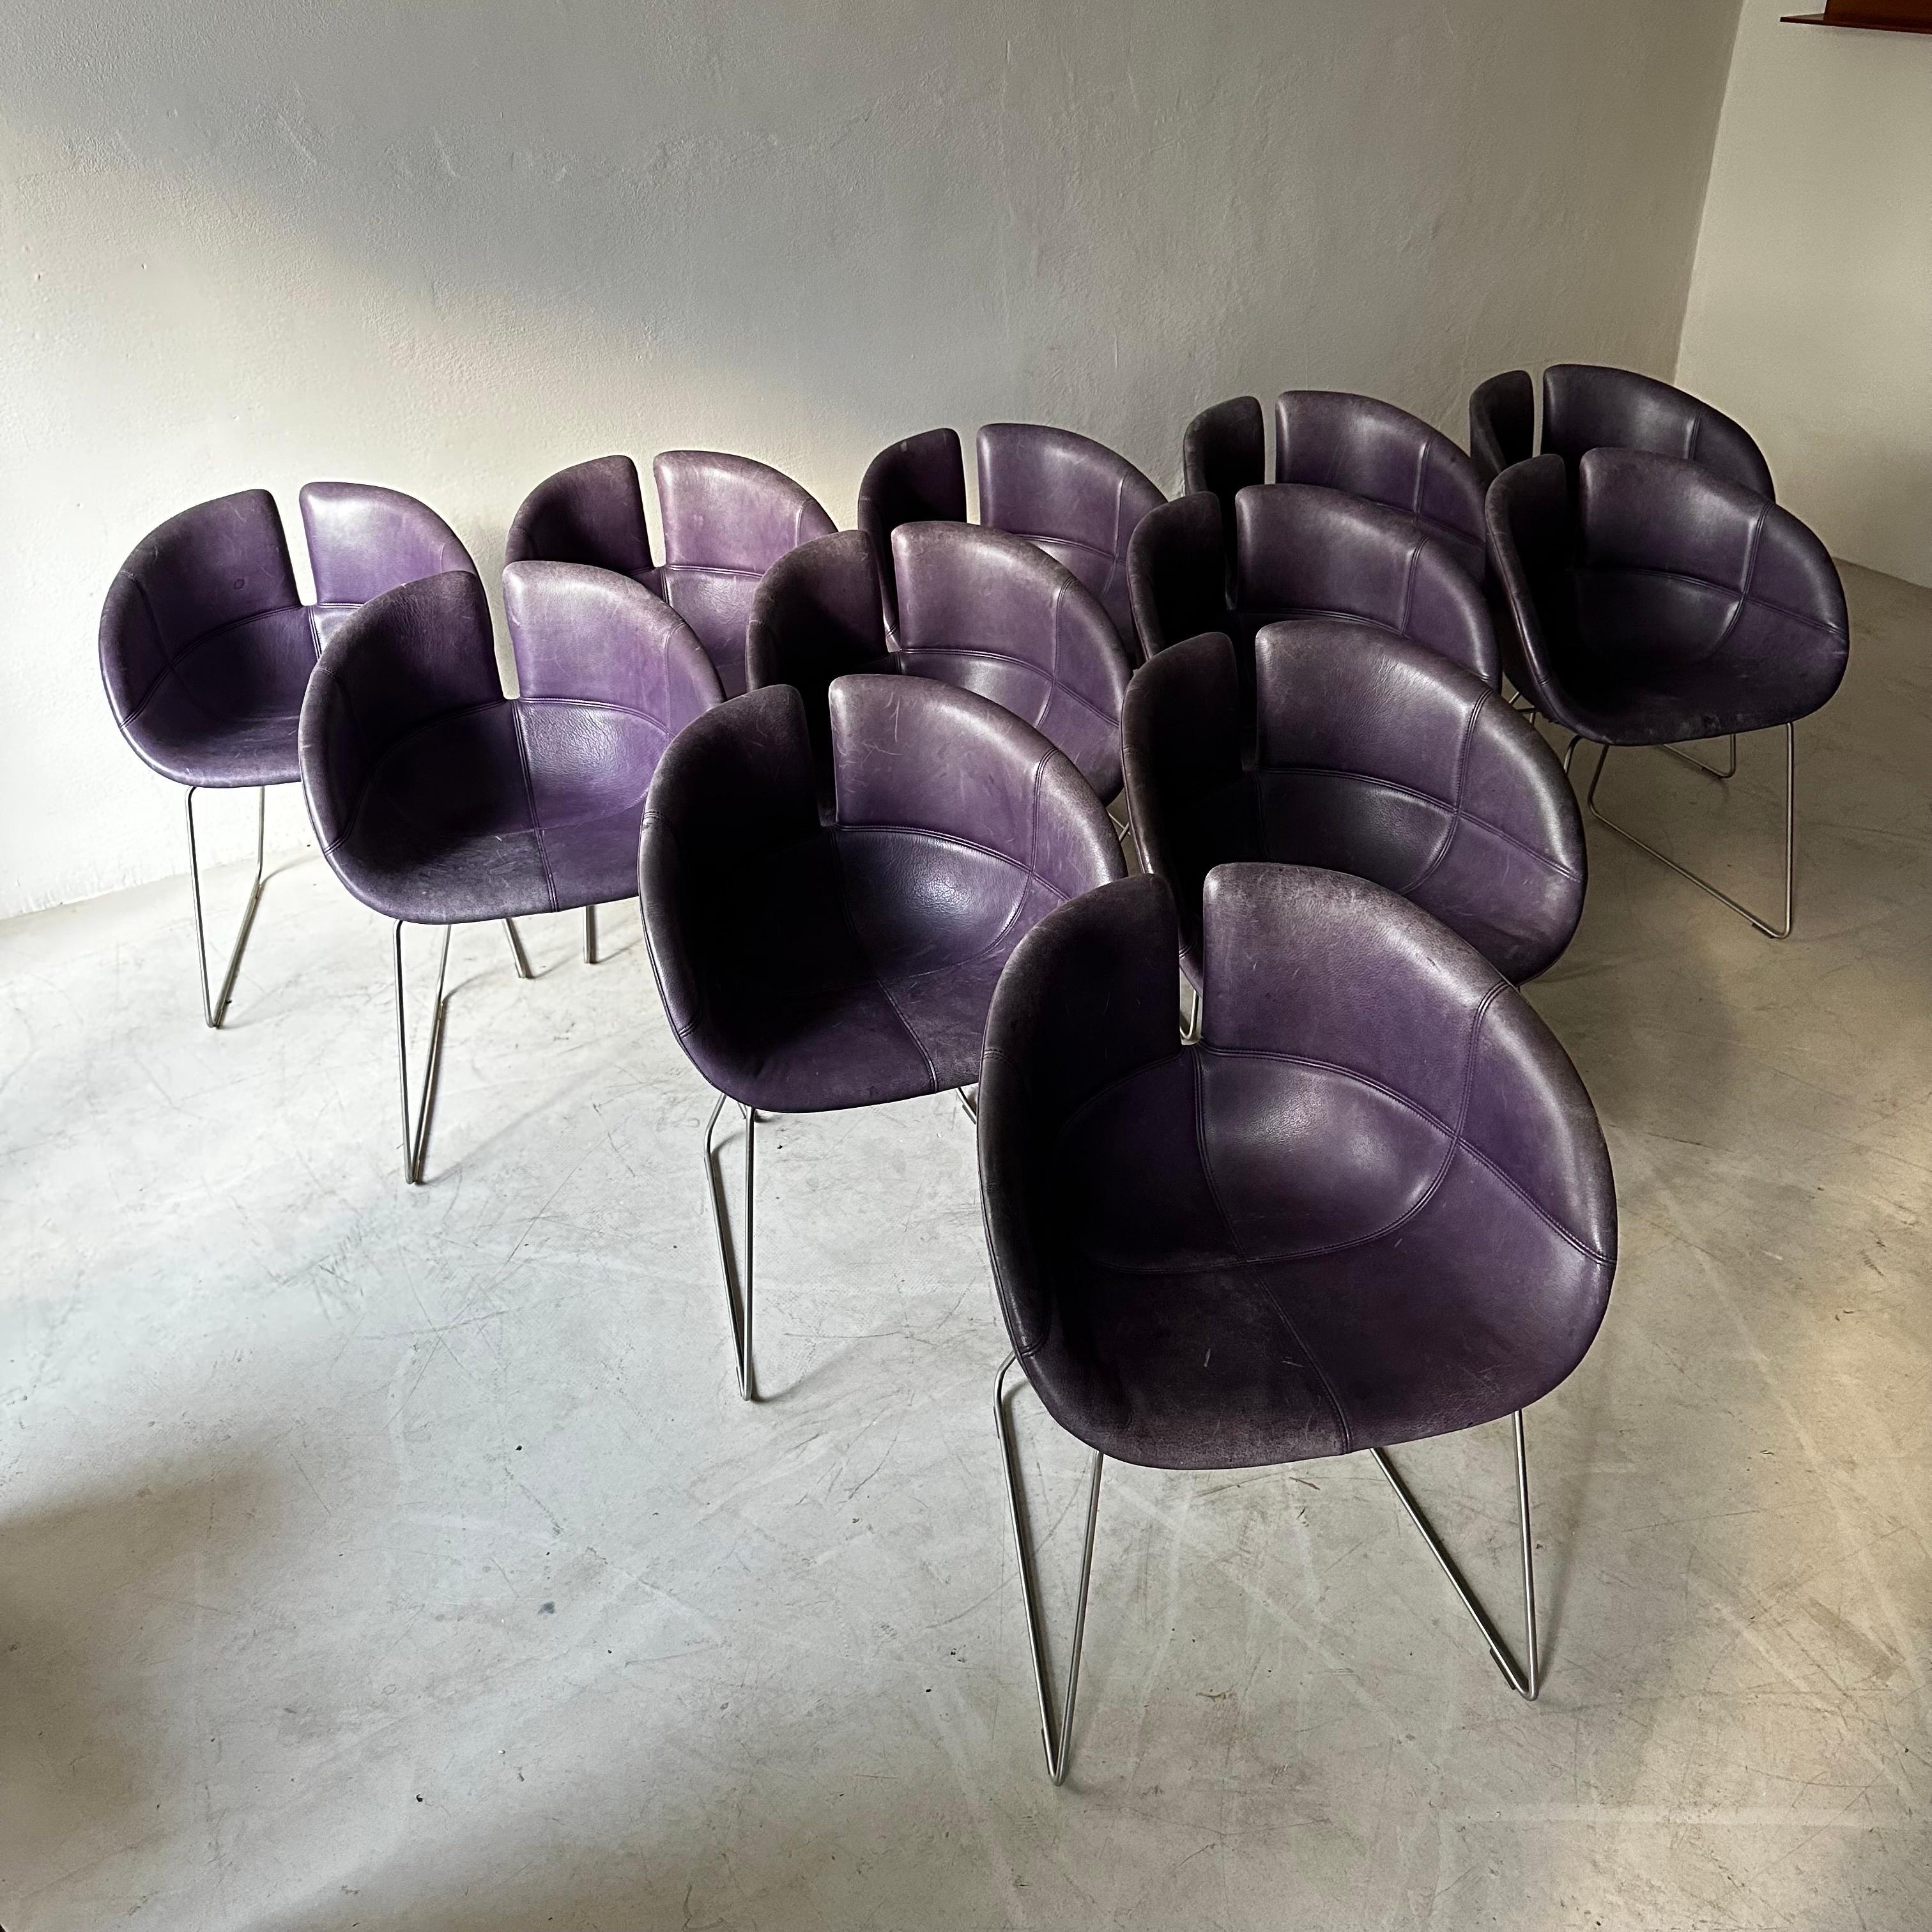 Modern Set of 12 Moroso Dining Chairs in Purple Leather by Patricia Urquiola 2002 For Sale